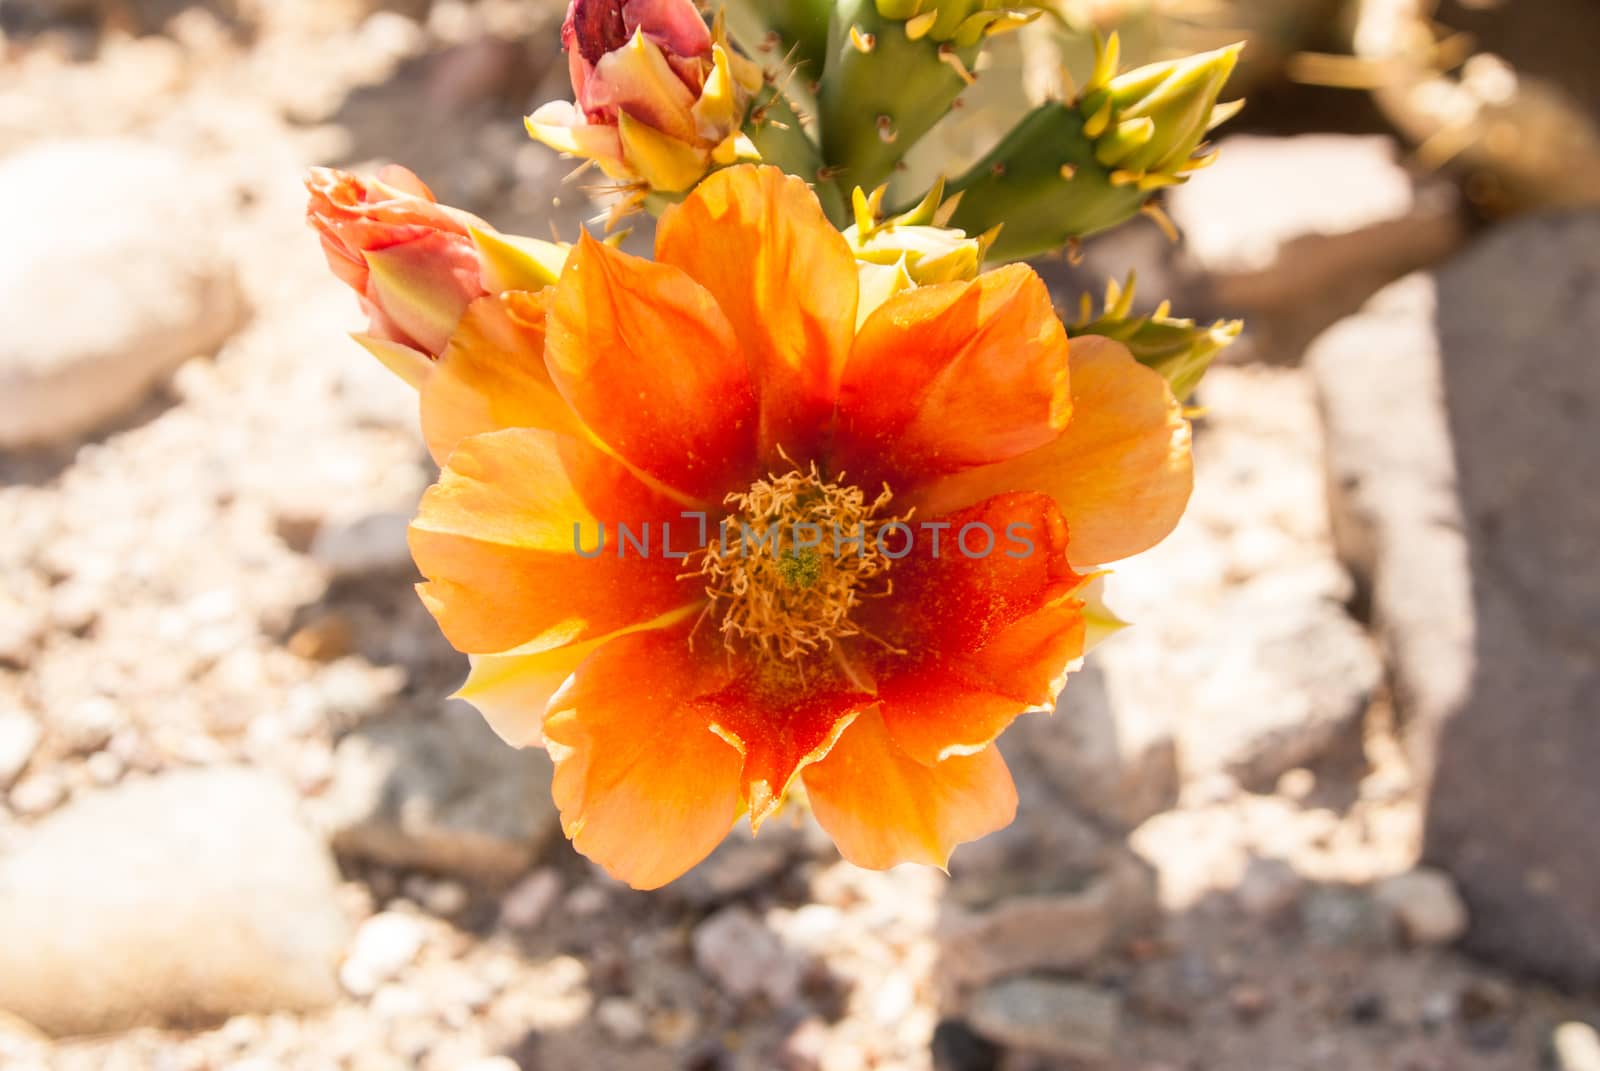 Blooming cactus flower by emattil